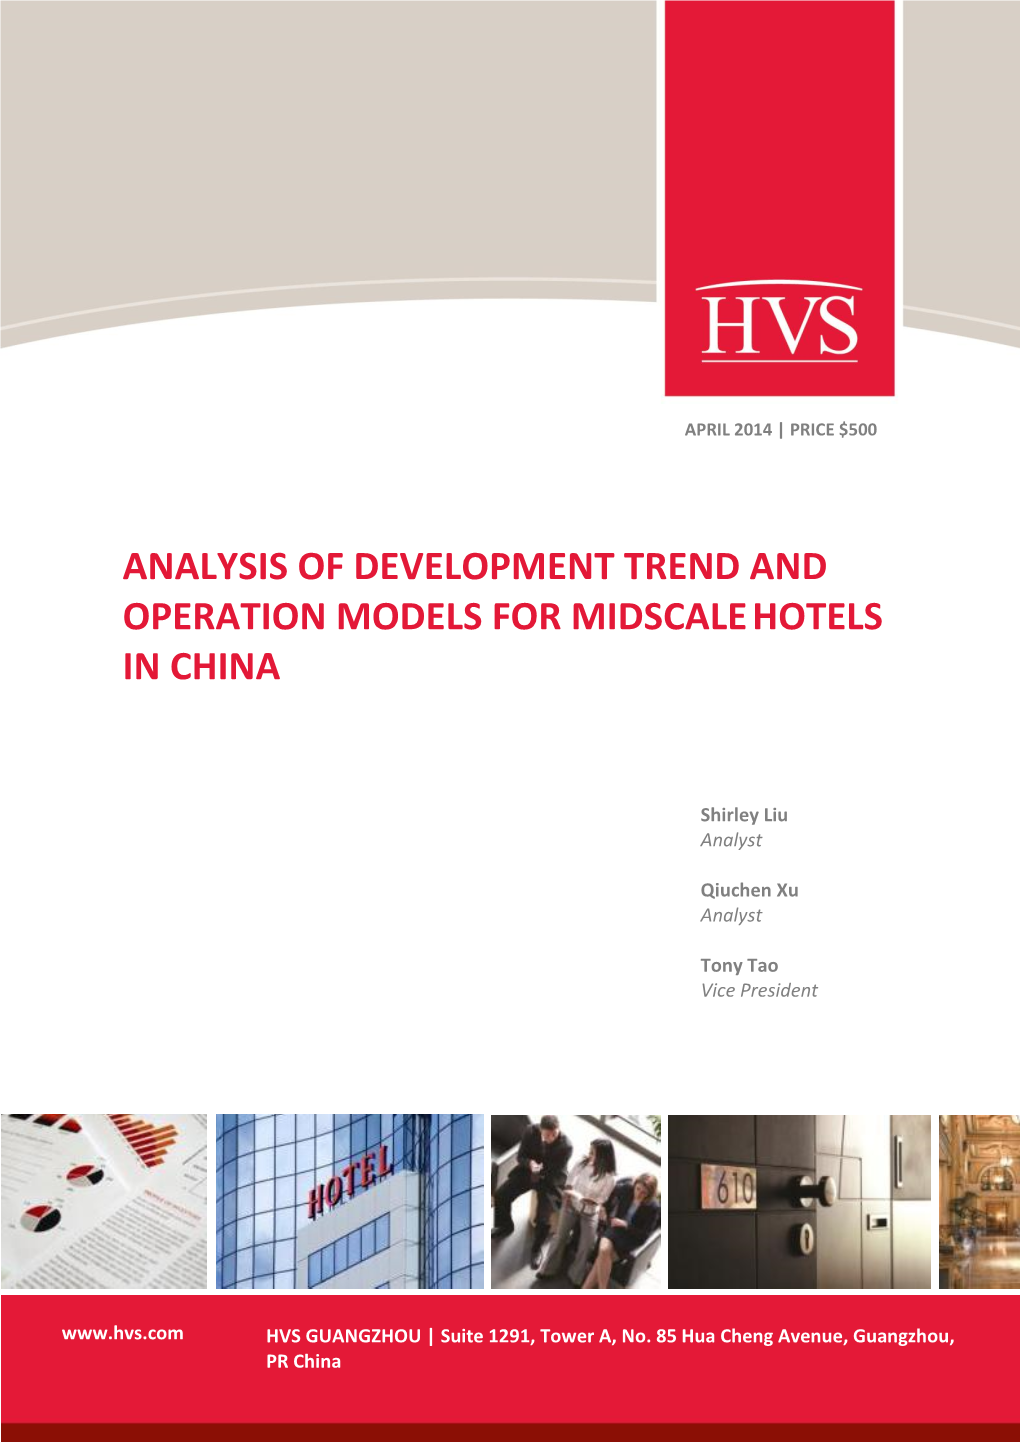 Analysis of Development Trend and Operation Models for Midscalehotels in China